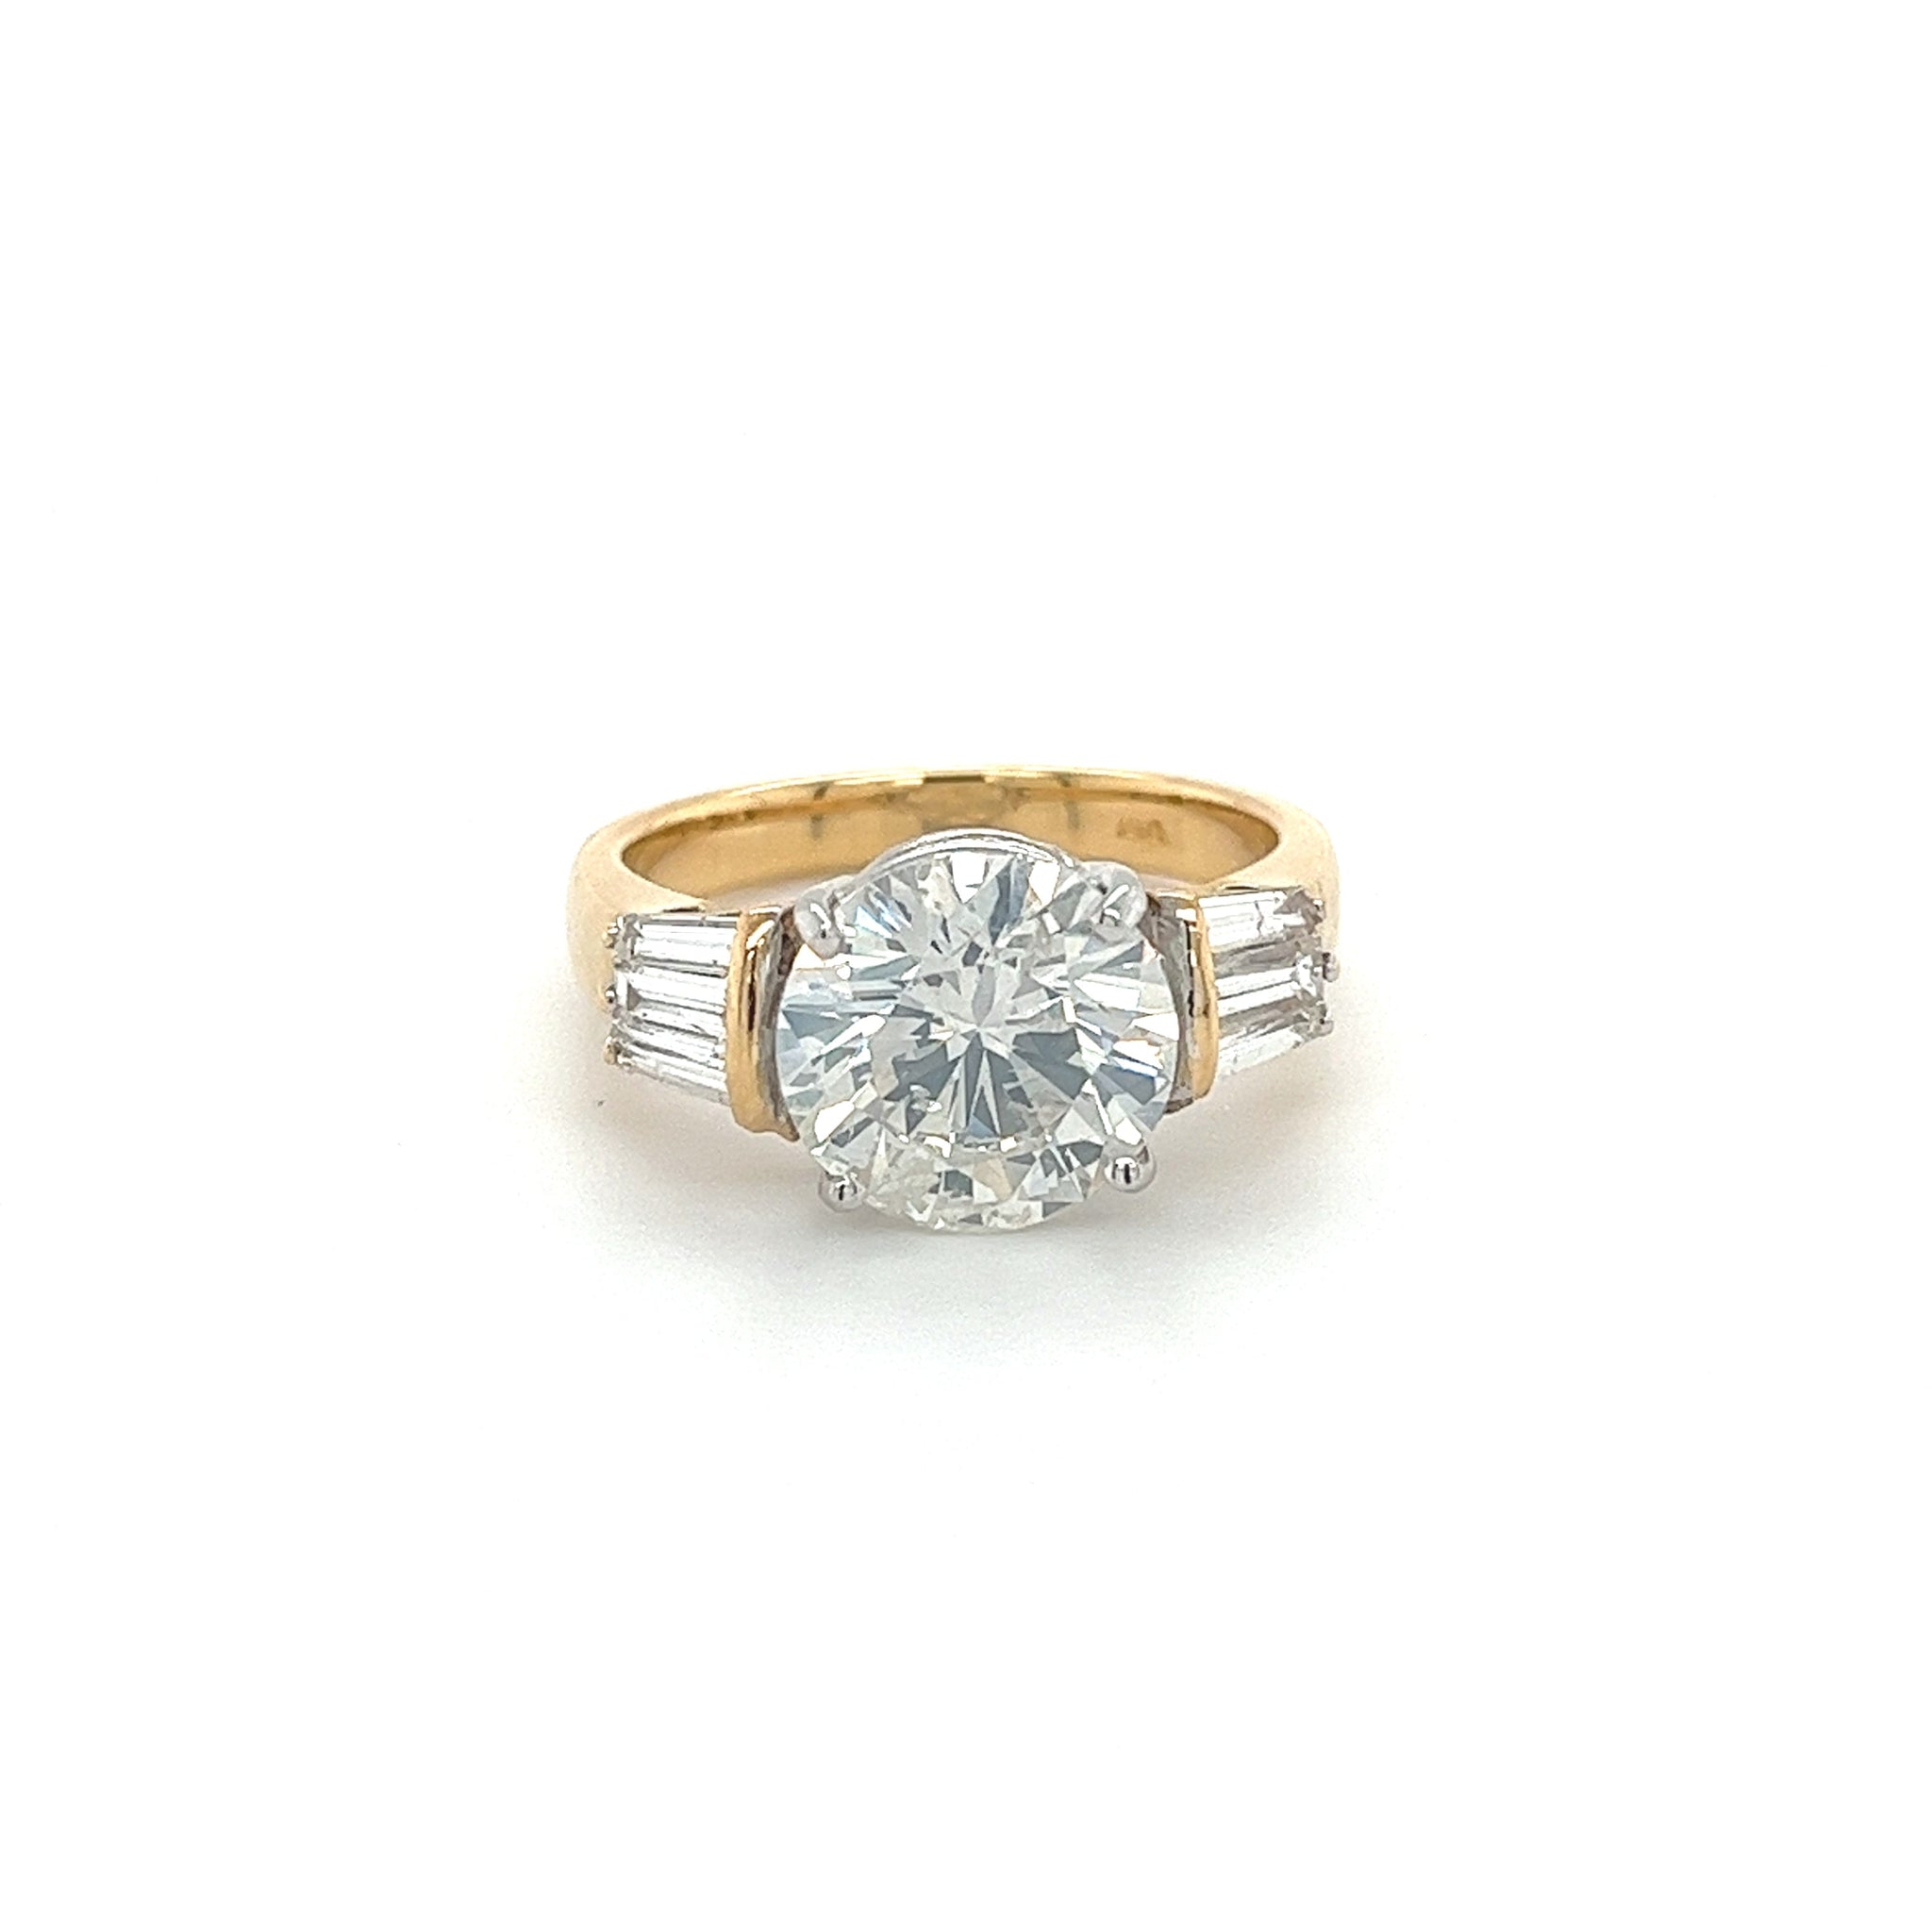 Natural 4.21 Carat Round Diamond Engagement Ring With Baguette Diamonds in Two Tone 18k Gold-Engagement Ring-ASSAY